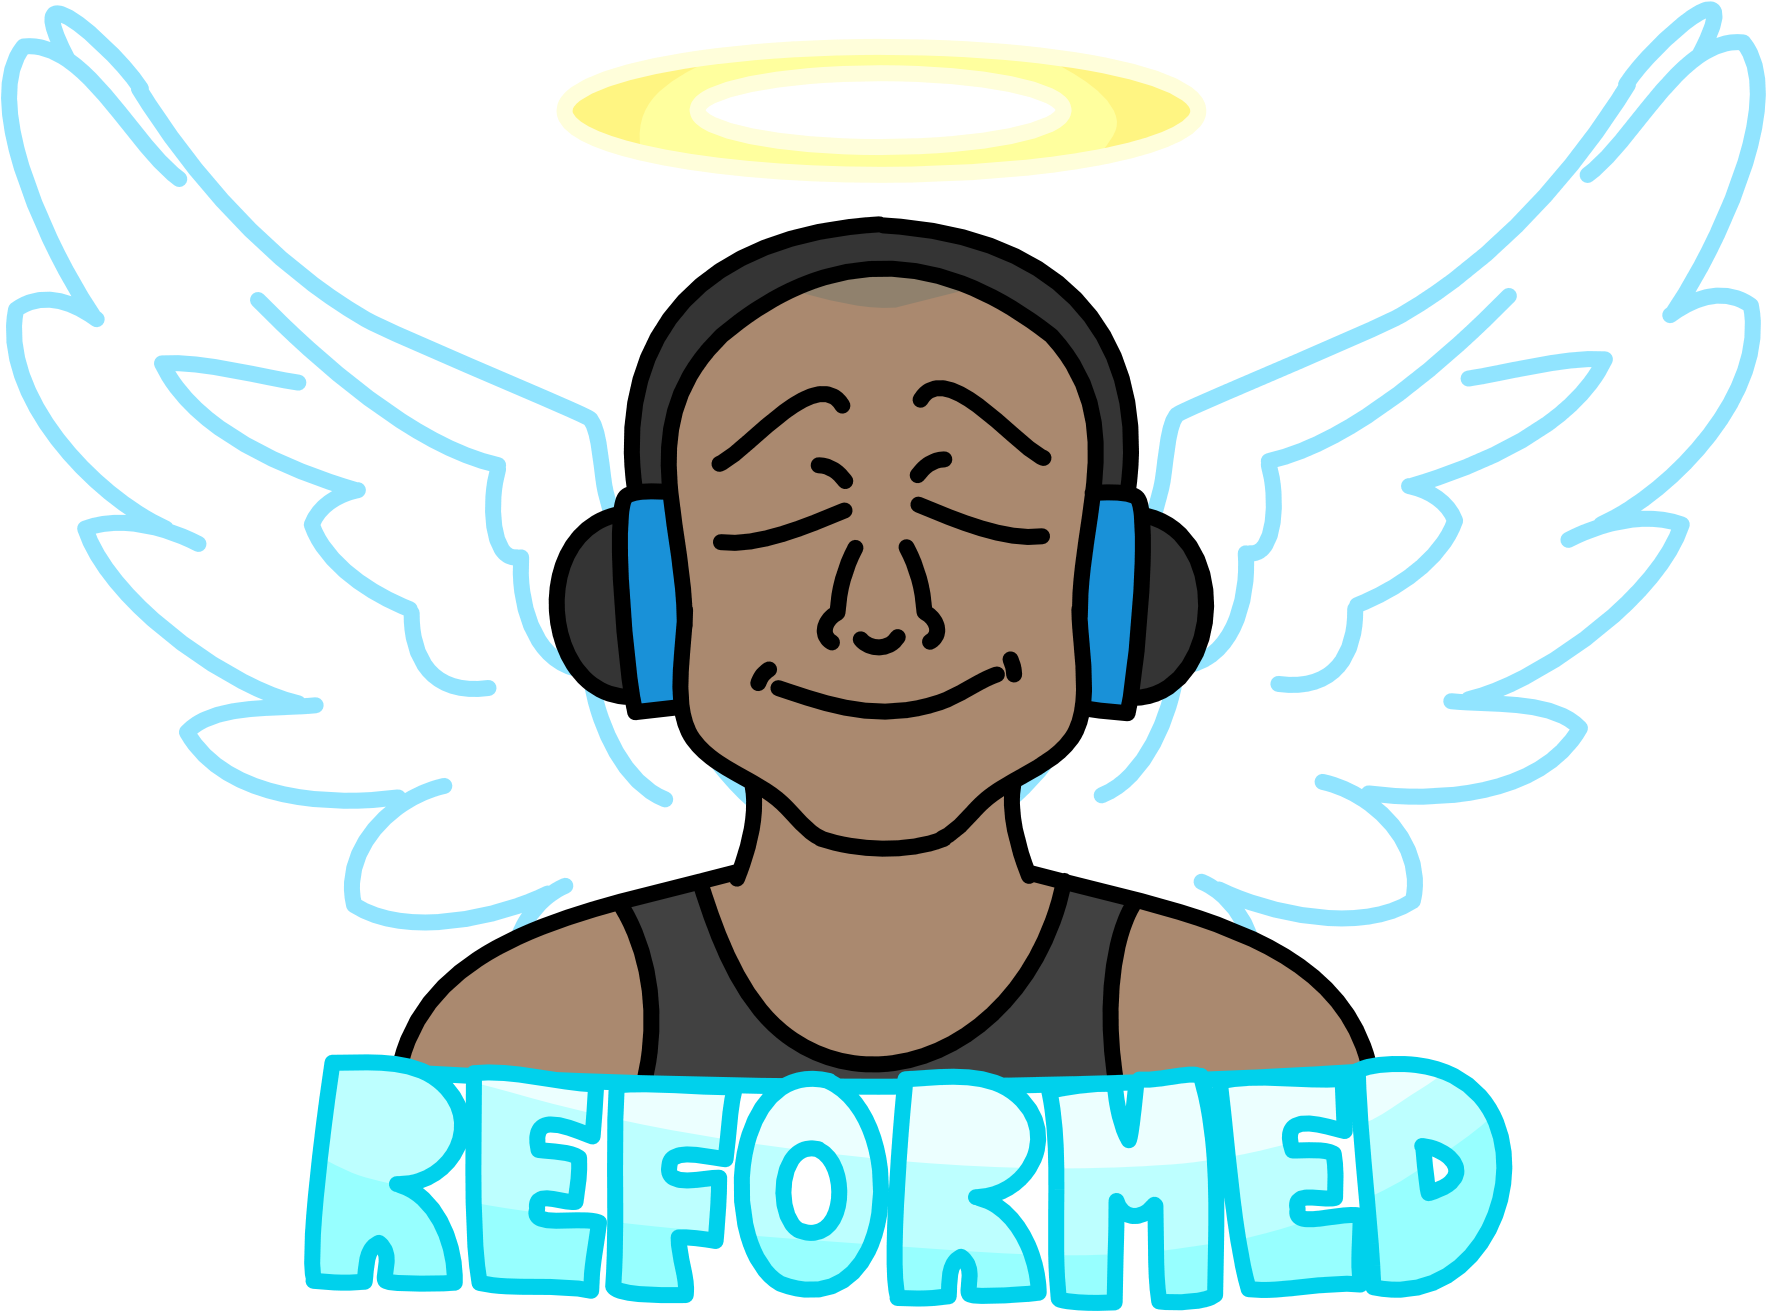 A Cartoon Of A Man With Wings And Headphones